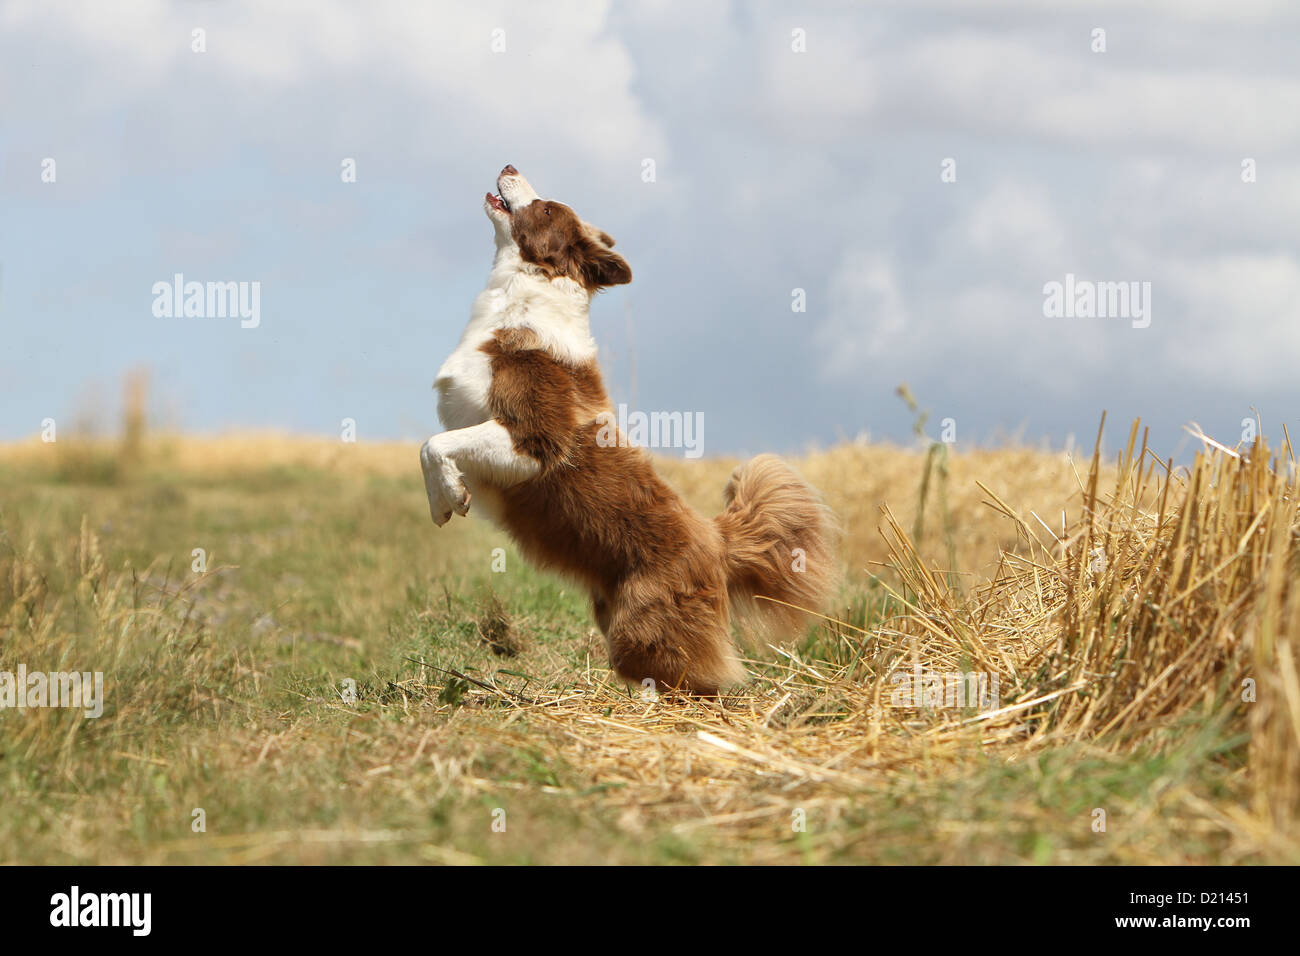 Dog Border Collie adult red and white running Stock Photo